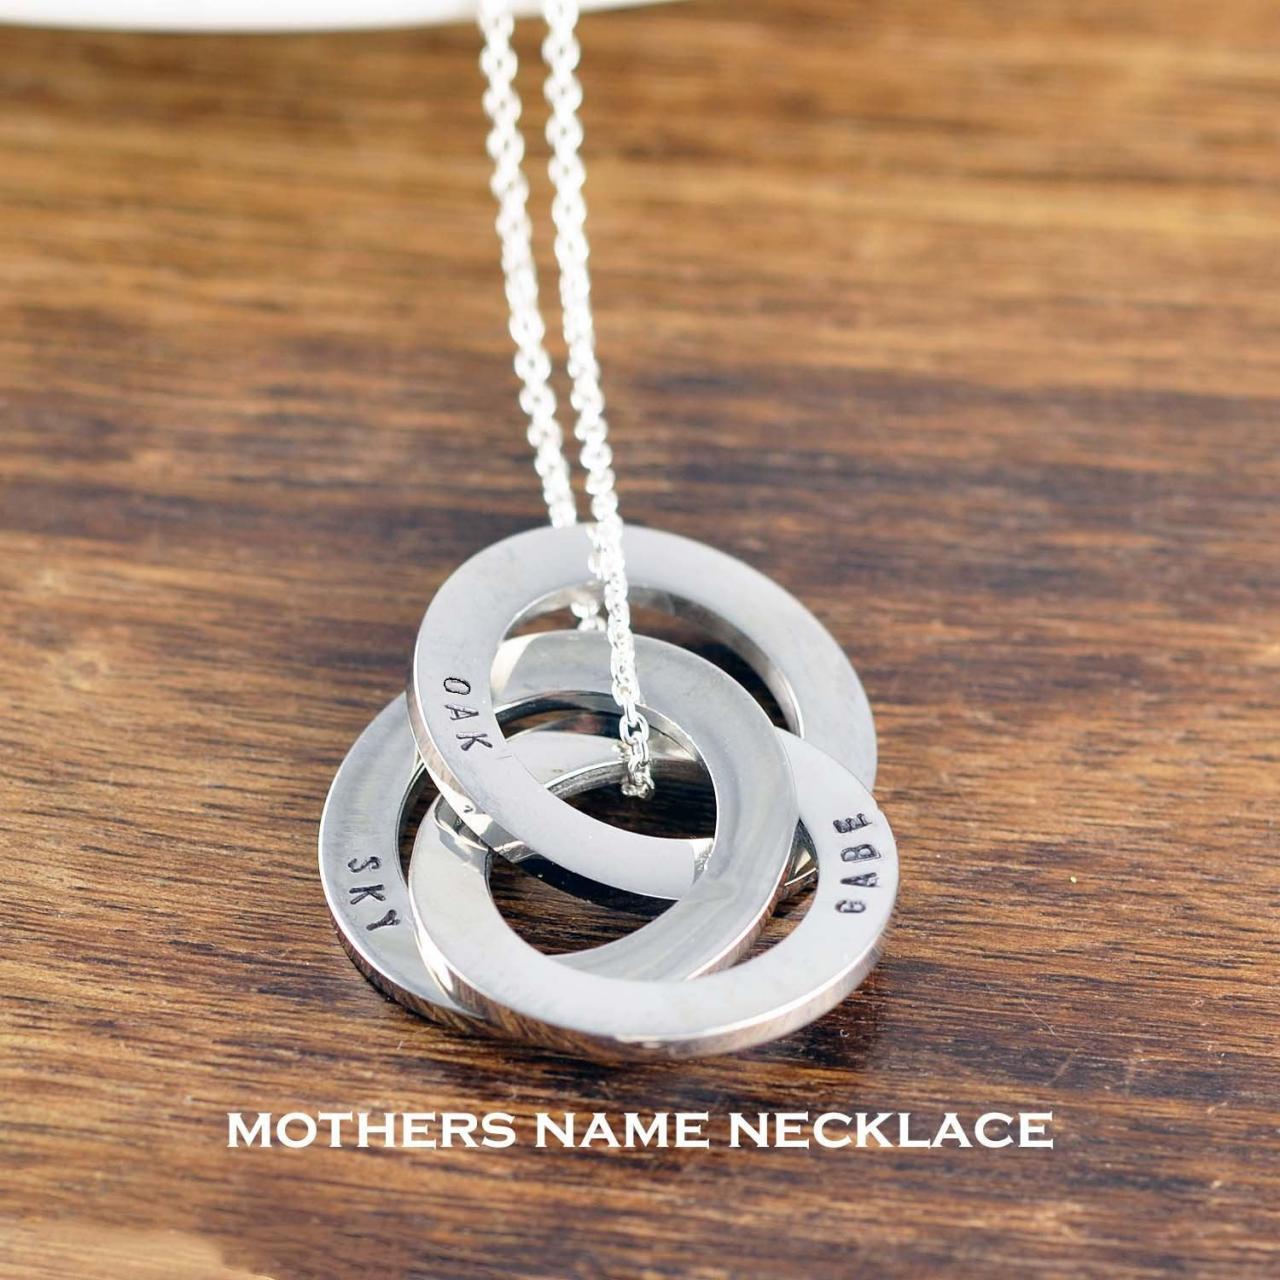 Personalized Mothers Necklace, Gift For Mom, Name Necklace For Mother, Mom Birthday Gifts, Mother's Day Gift, Mom